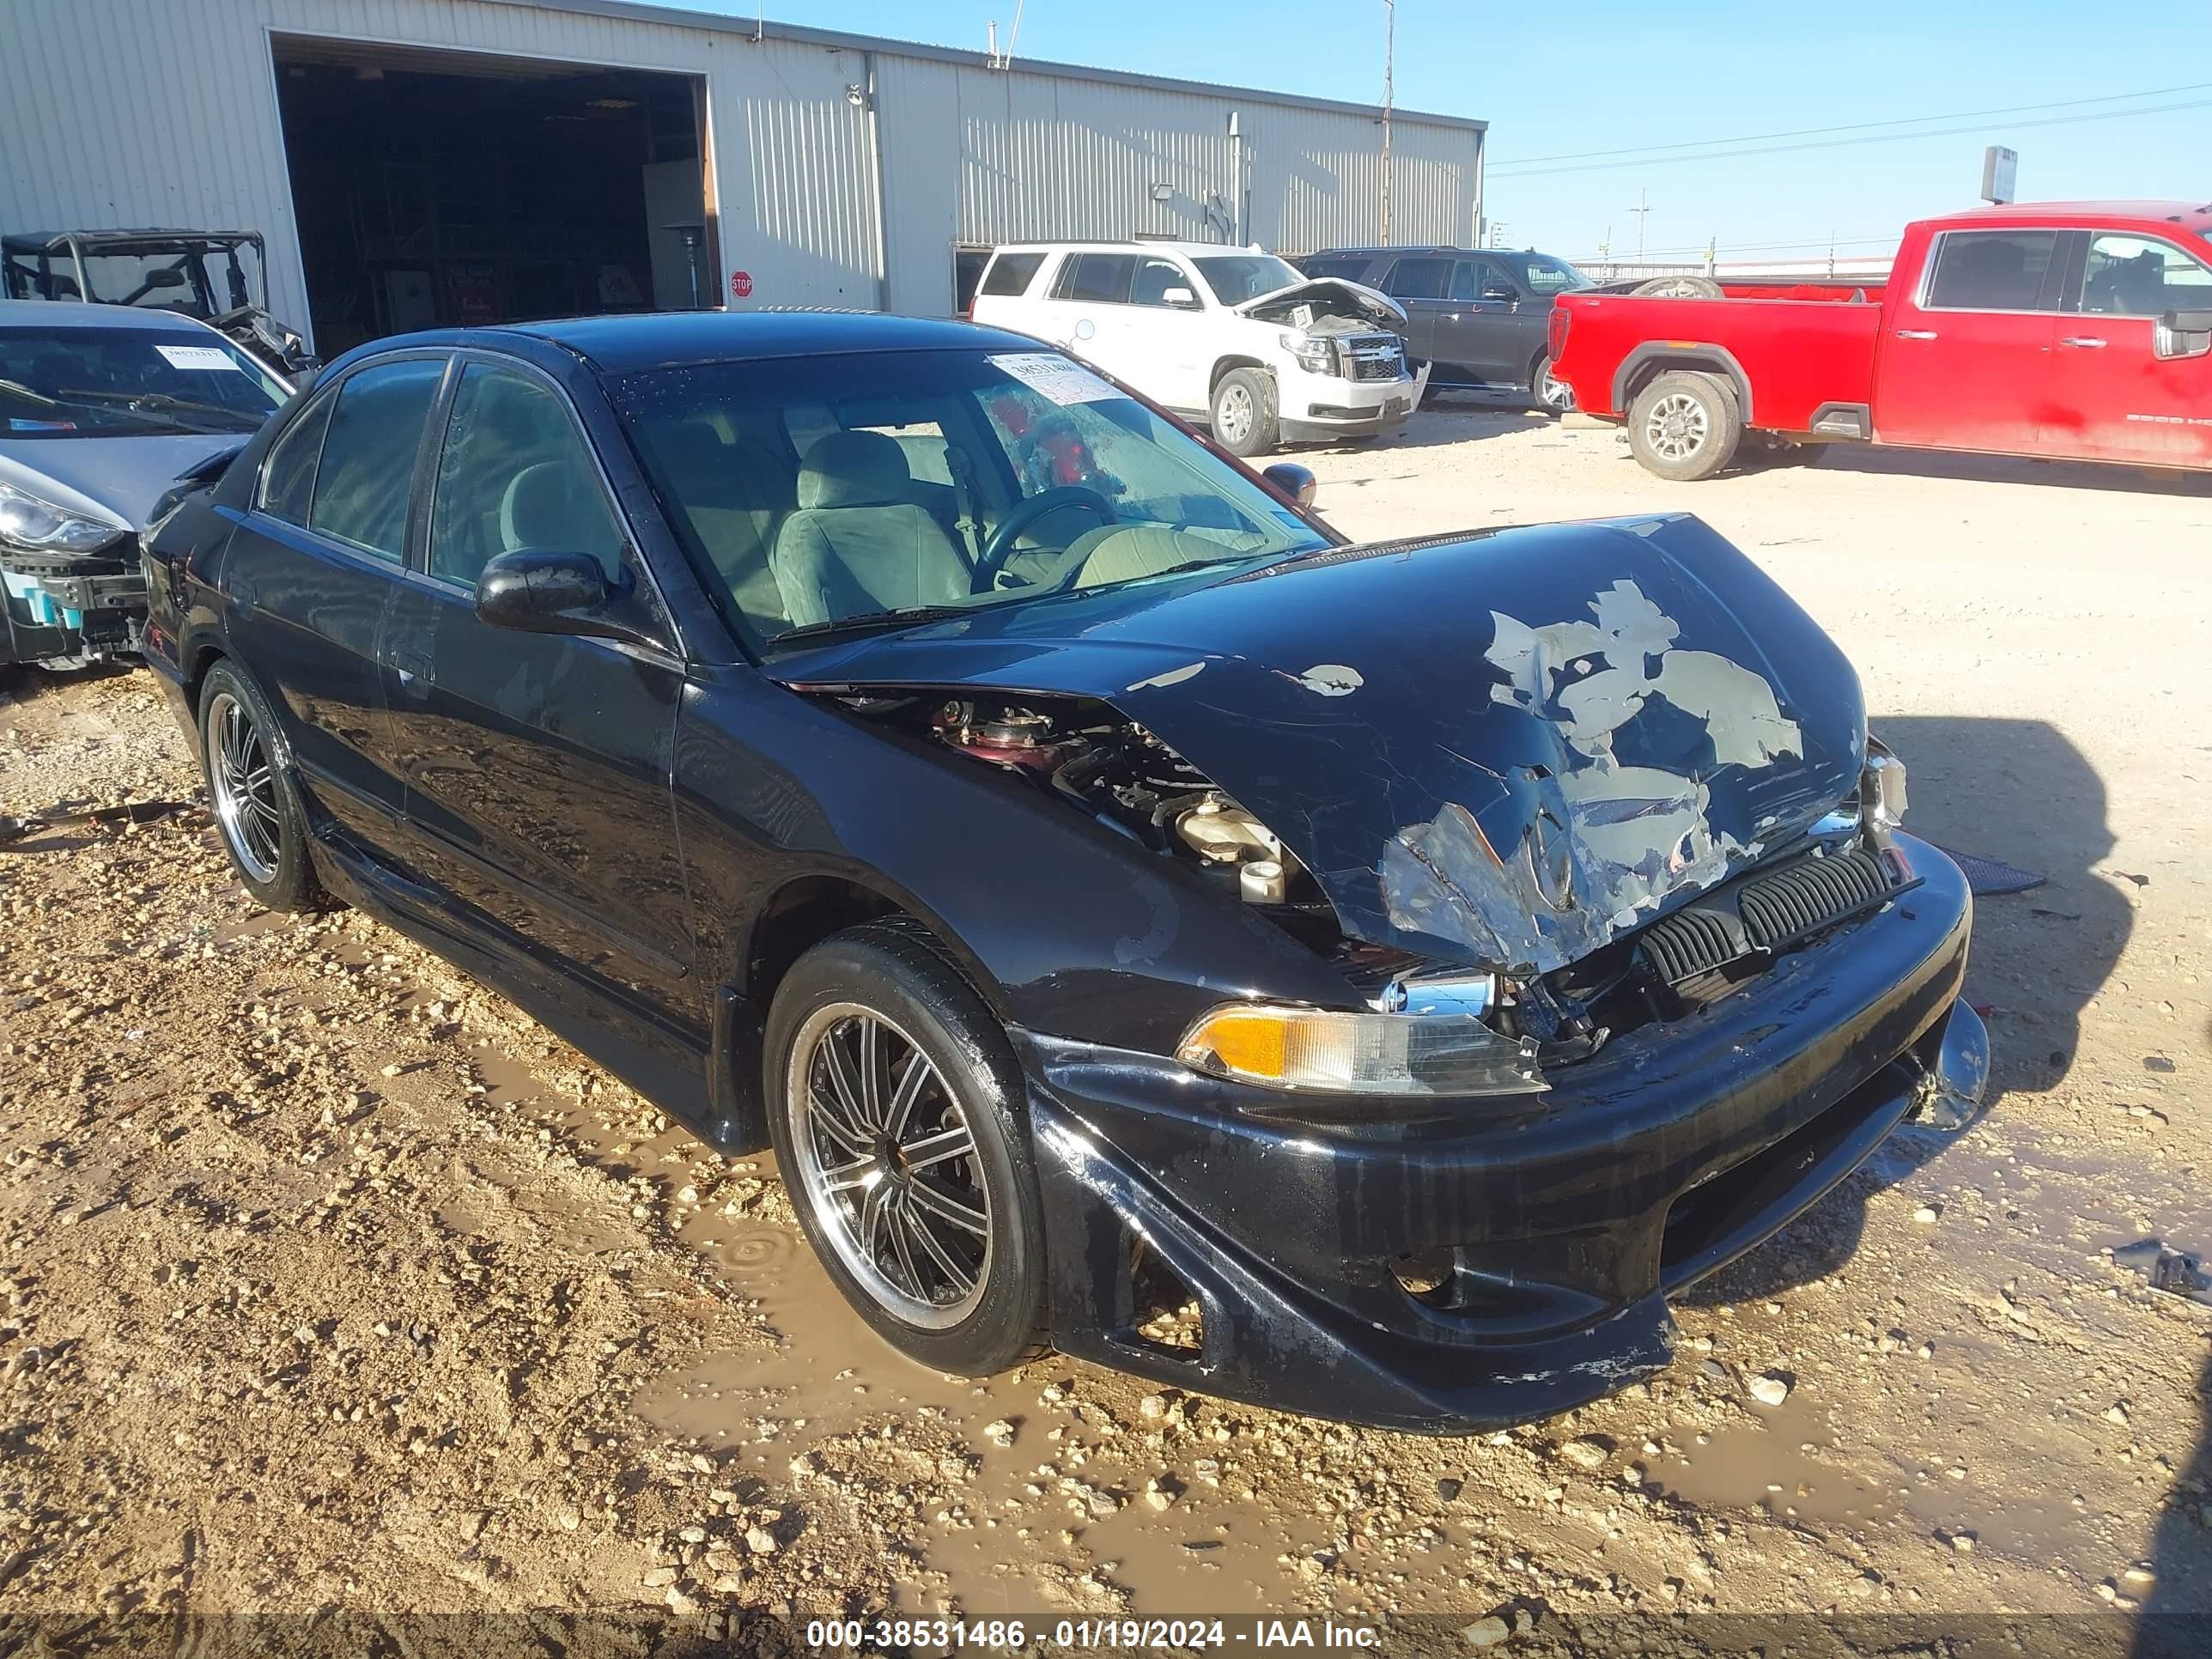 vin: 4A3AA46G7XE076256 4A3AA46G7XE076256 1999 mitsubishi galant 2400 for Sale in 79601, 7700 Us 277, Hawley, USA